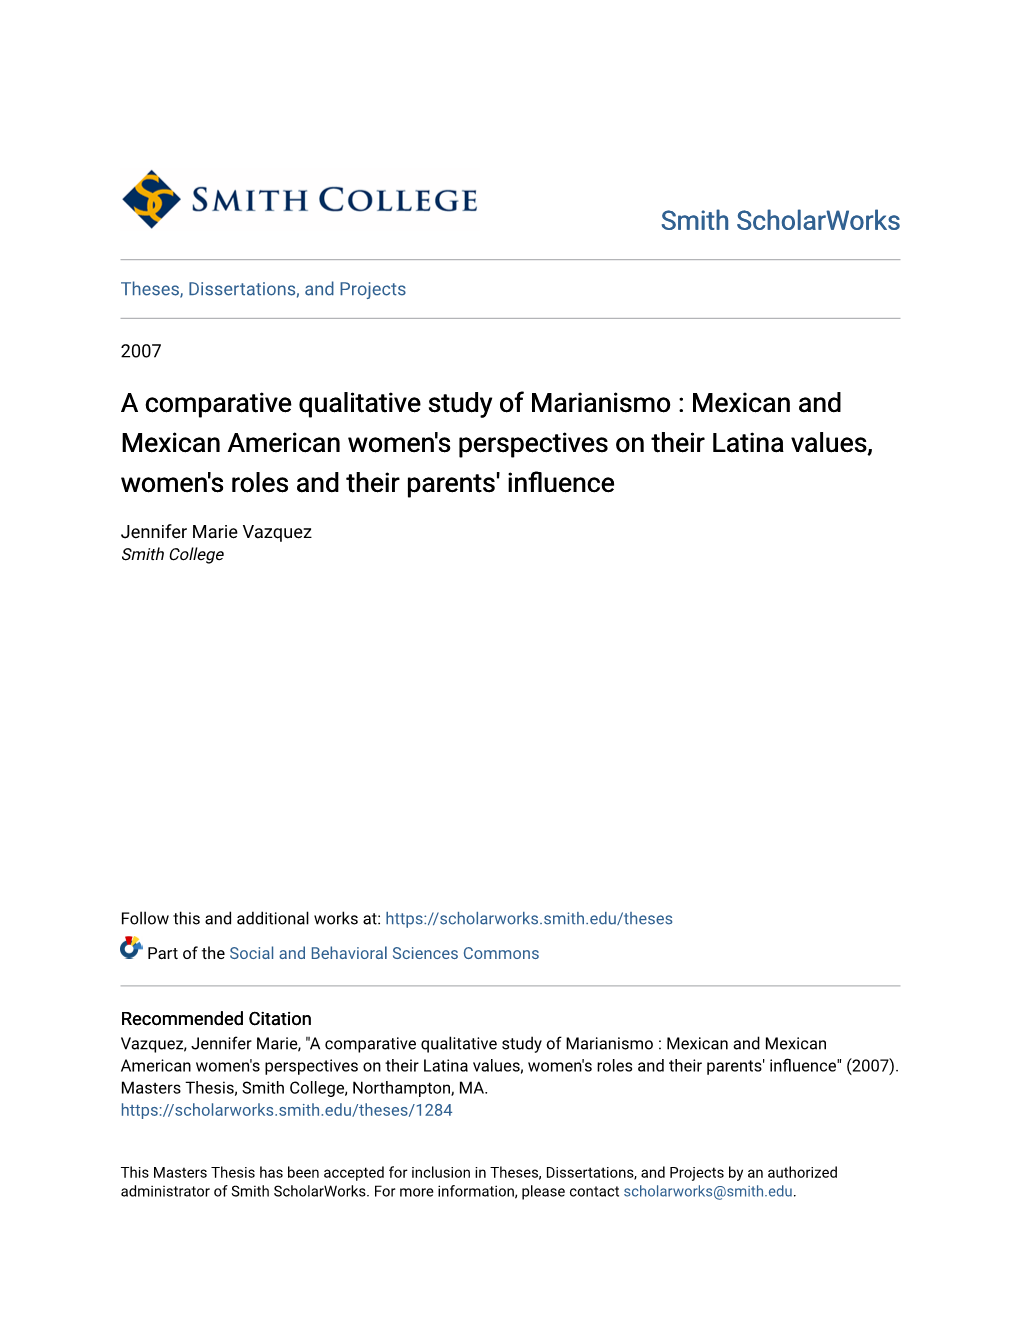 A Comparative Qualitative Study of Marianismo : Mexican and Mexican American Women's Perspectives on Their Latina Values, Women's Roles and Their Parents' Influence